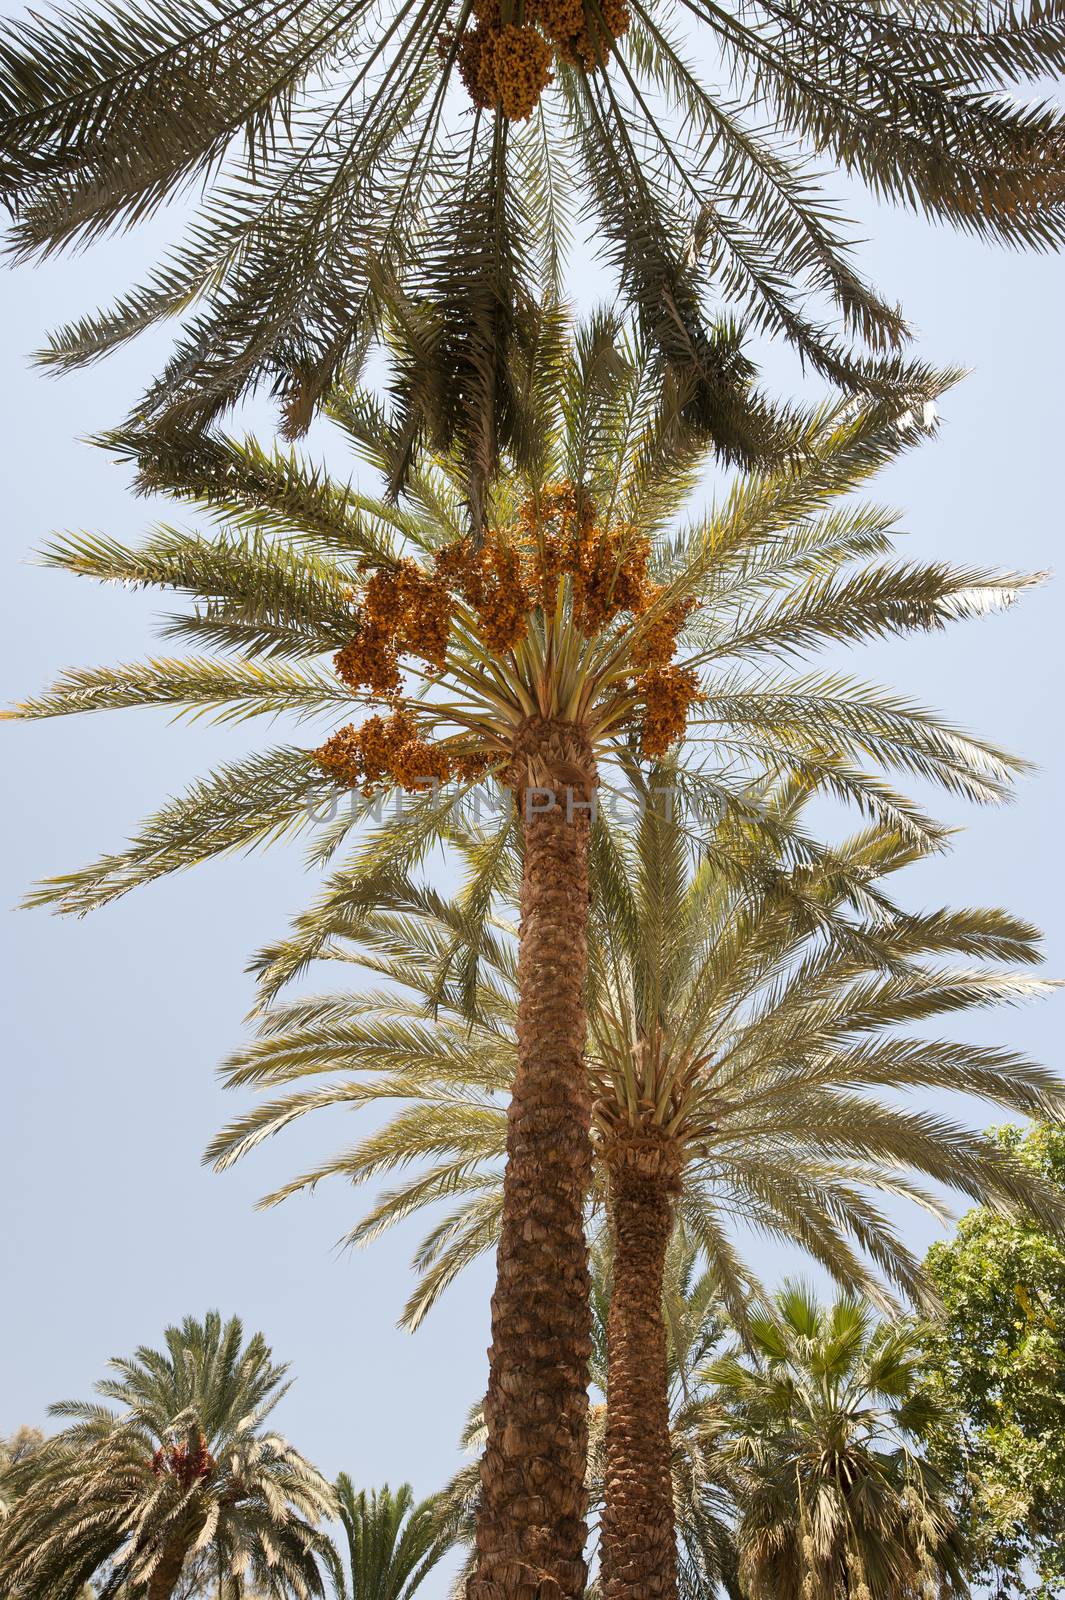 Canopy of date palm trees phoenix dactylifera with dates in the sun